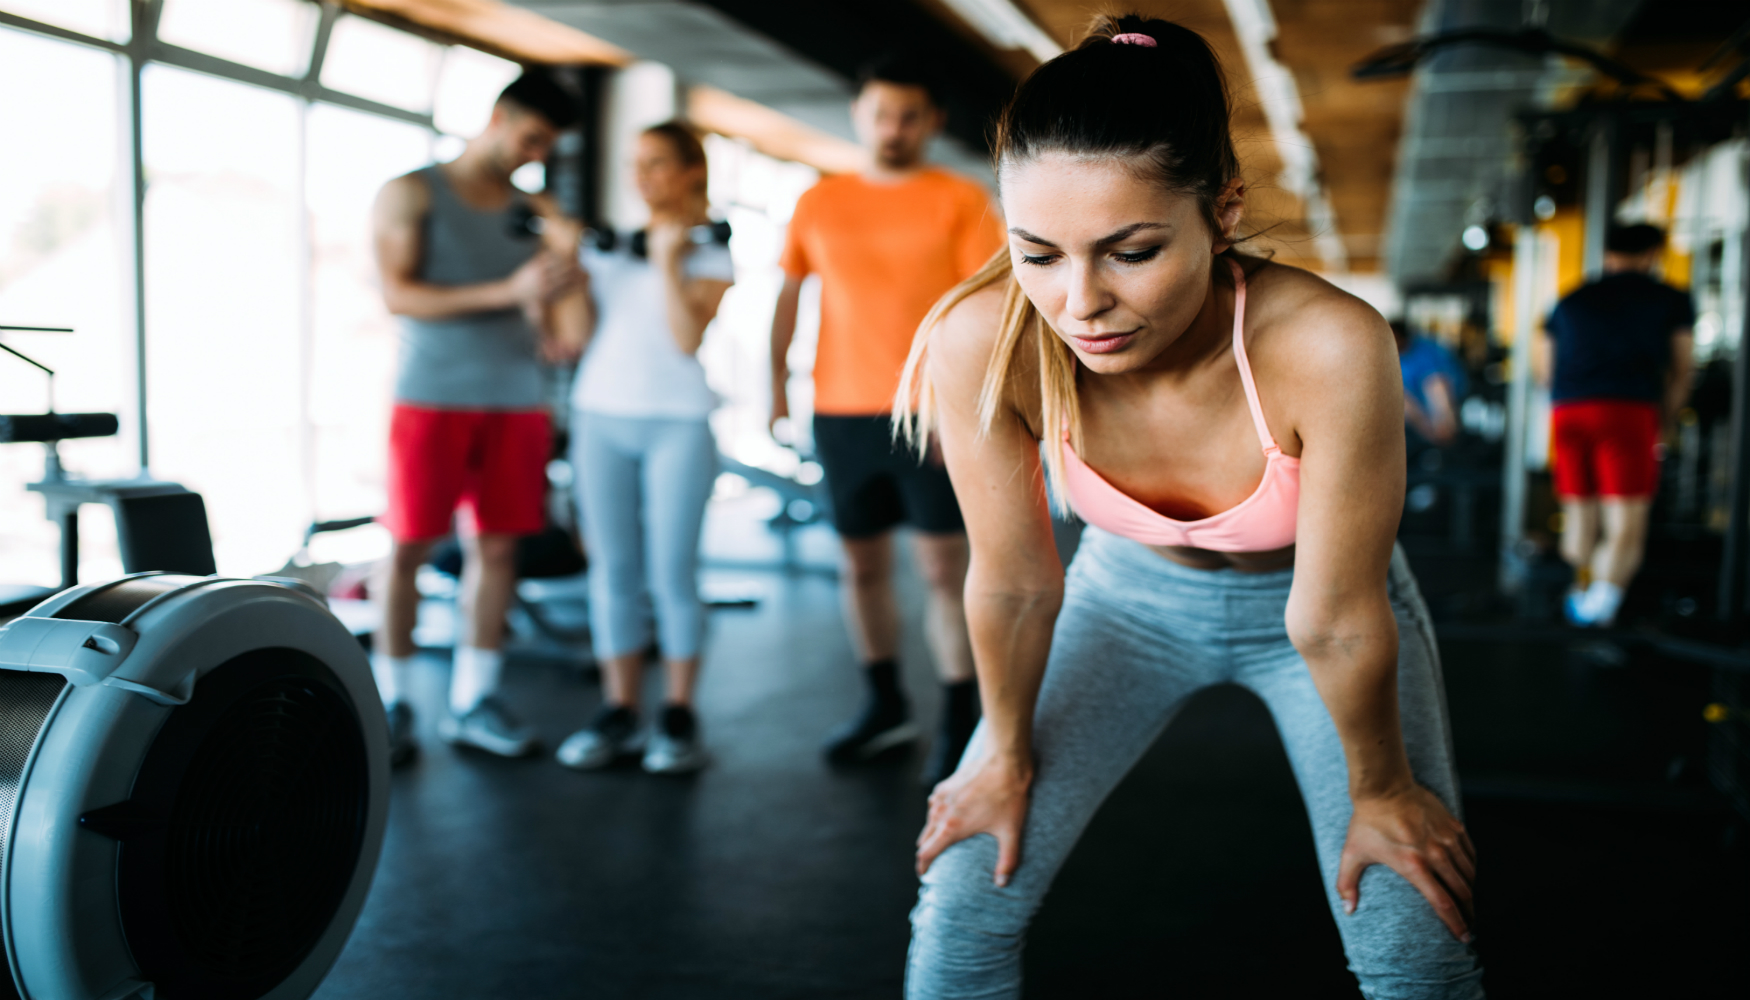 Personal Trainer Tips for Beating a Fitness Slump